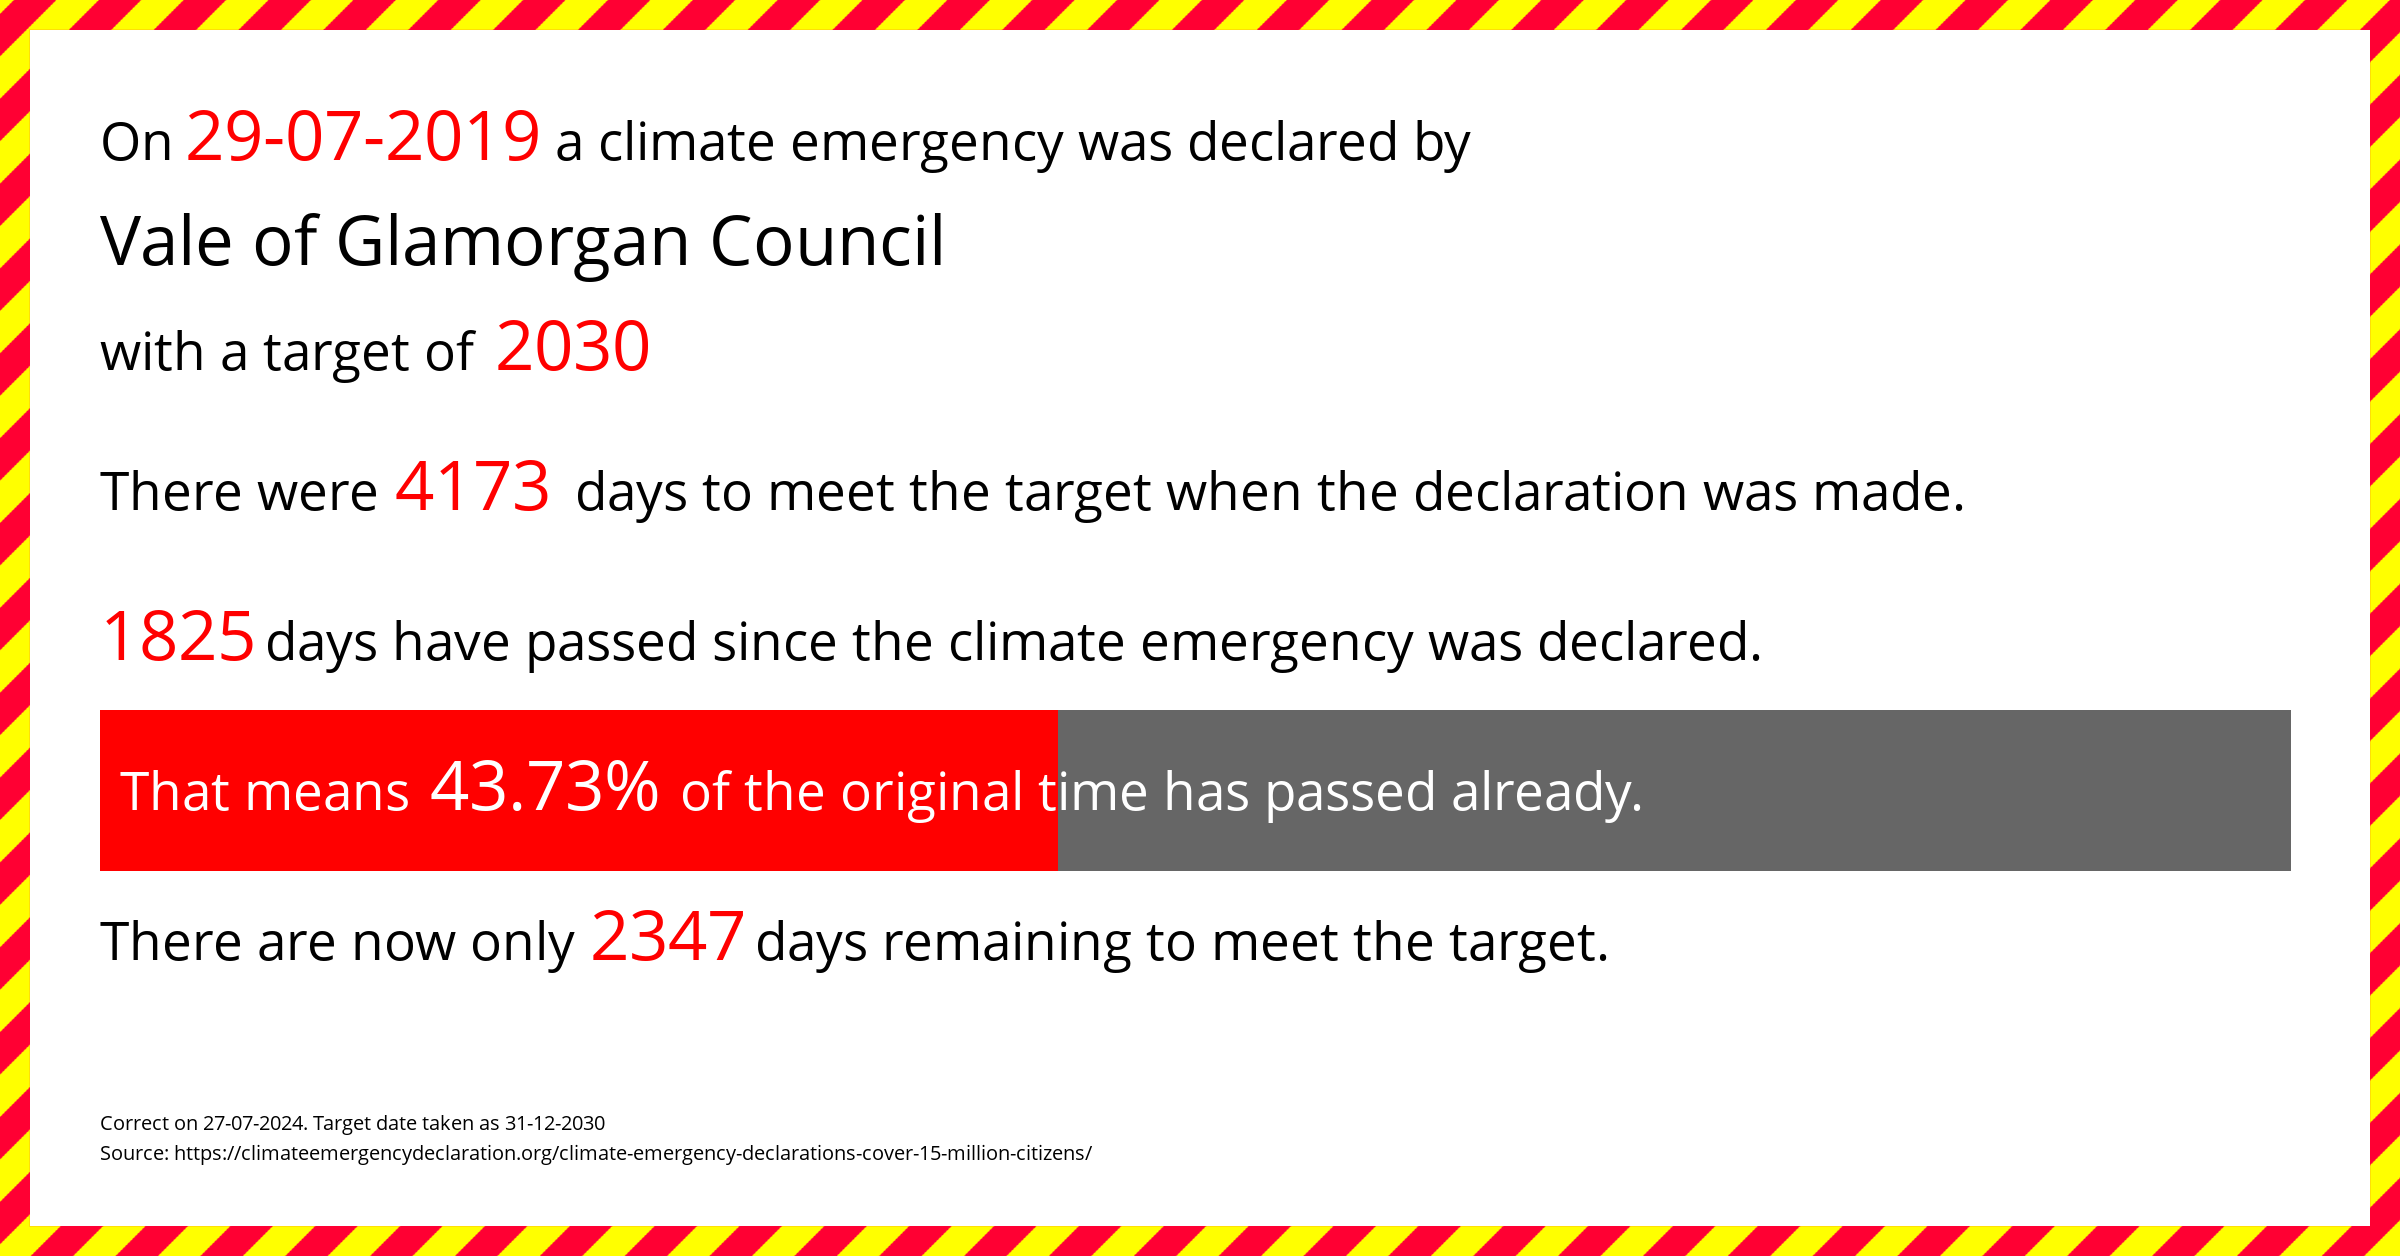 Vale of Glamorgan Council declared a Climate emergency on Monday 29th July 2019, with a target of 2030.